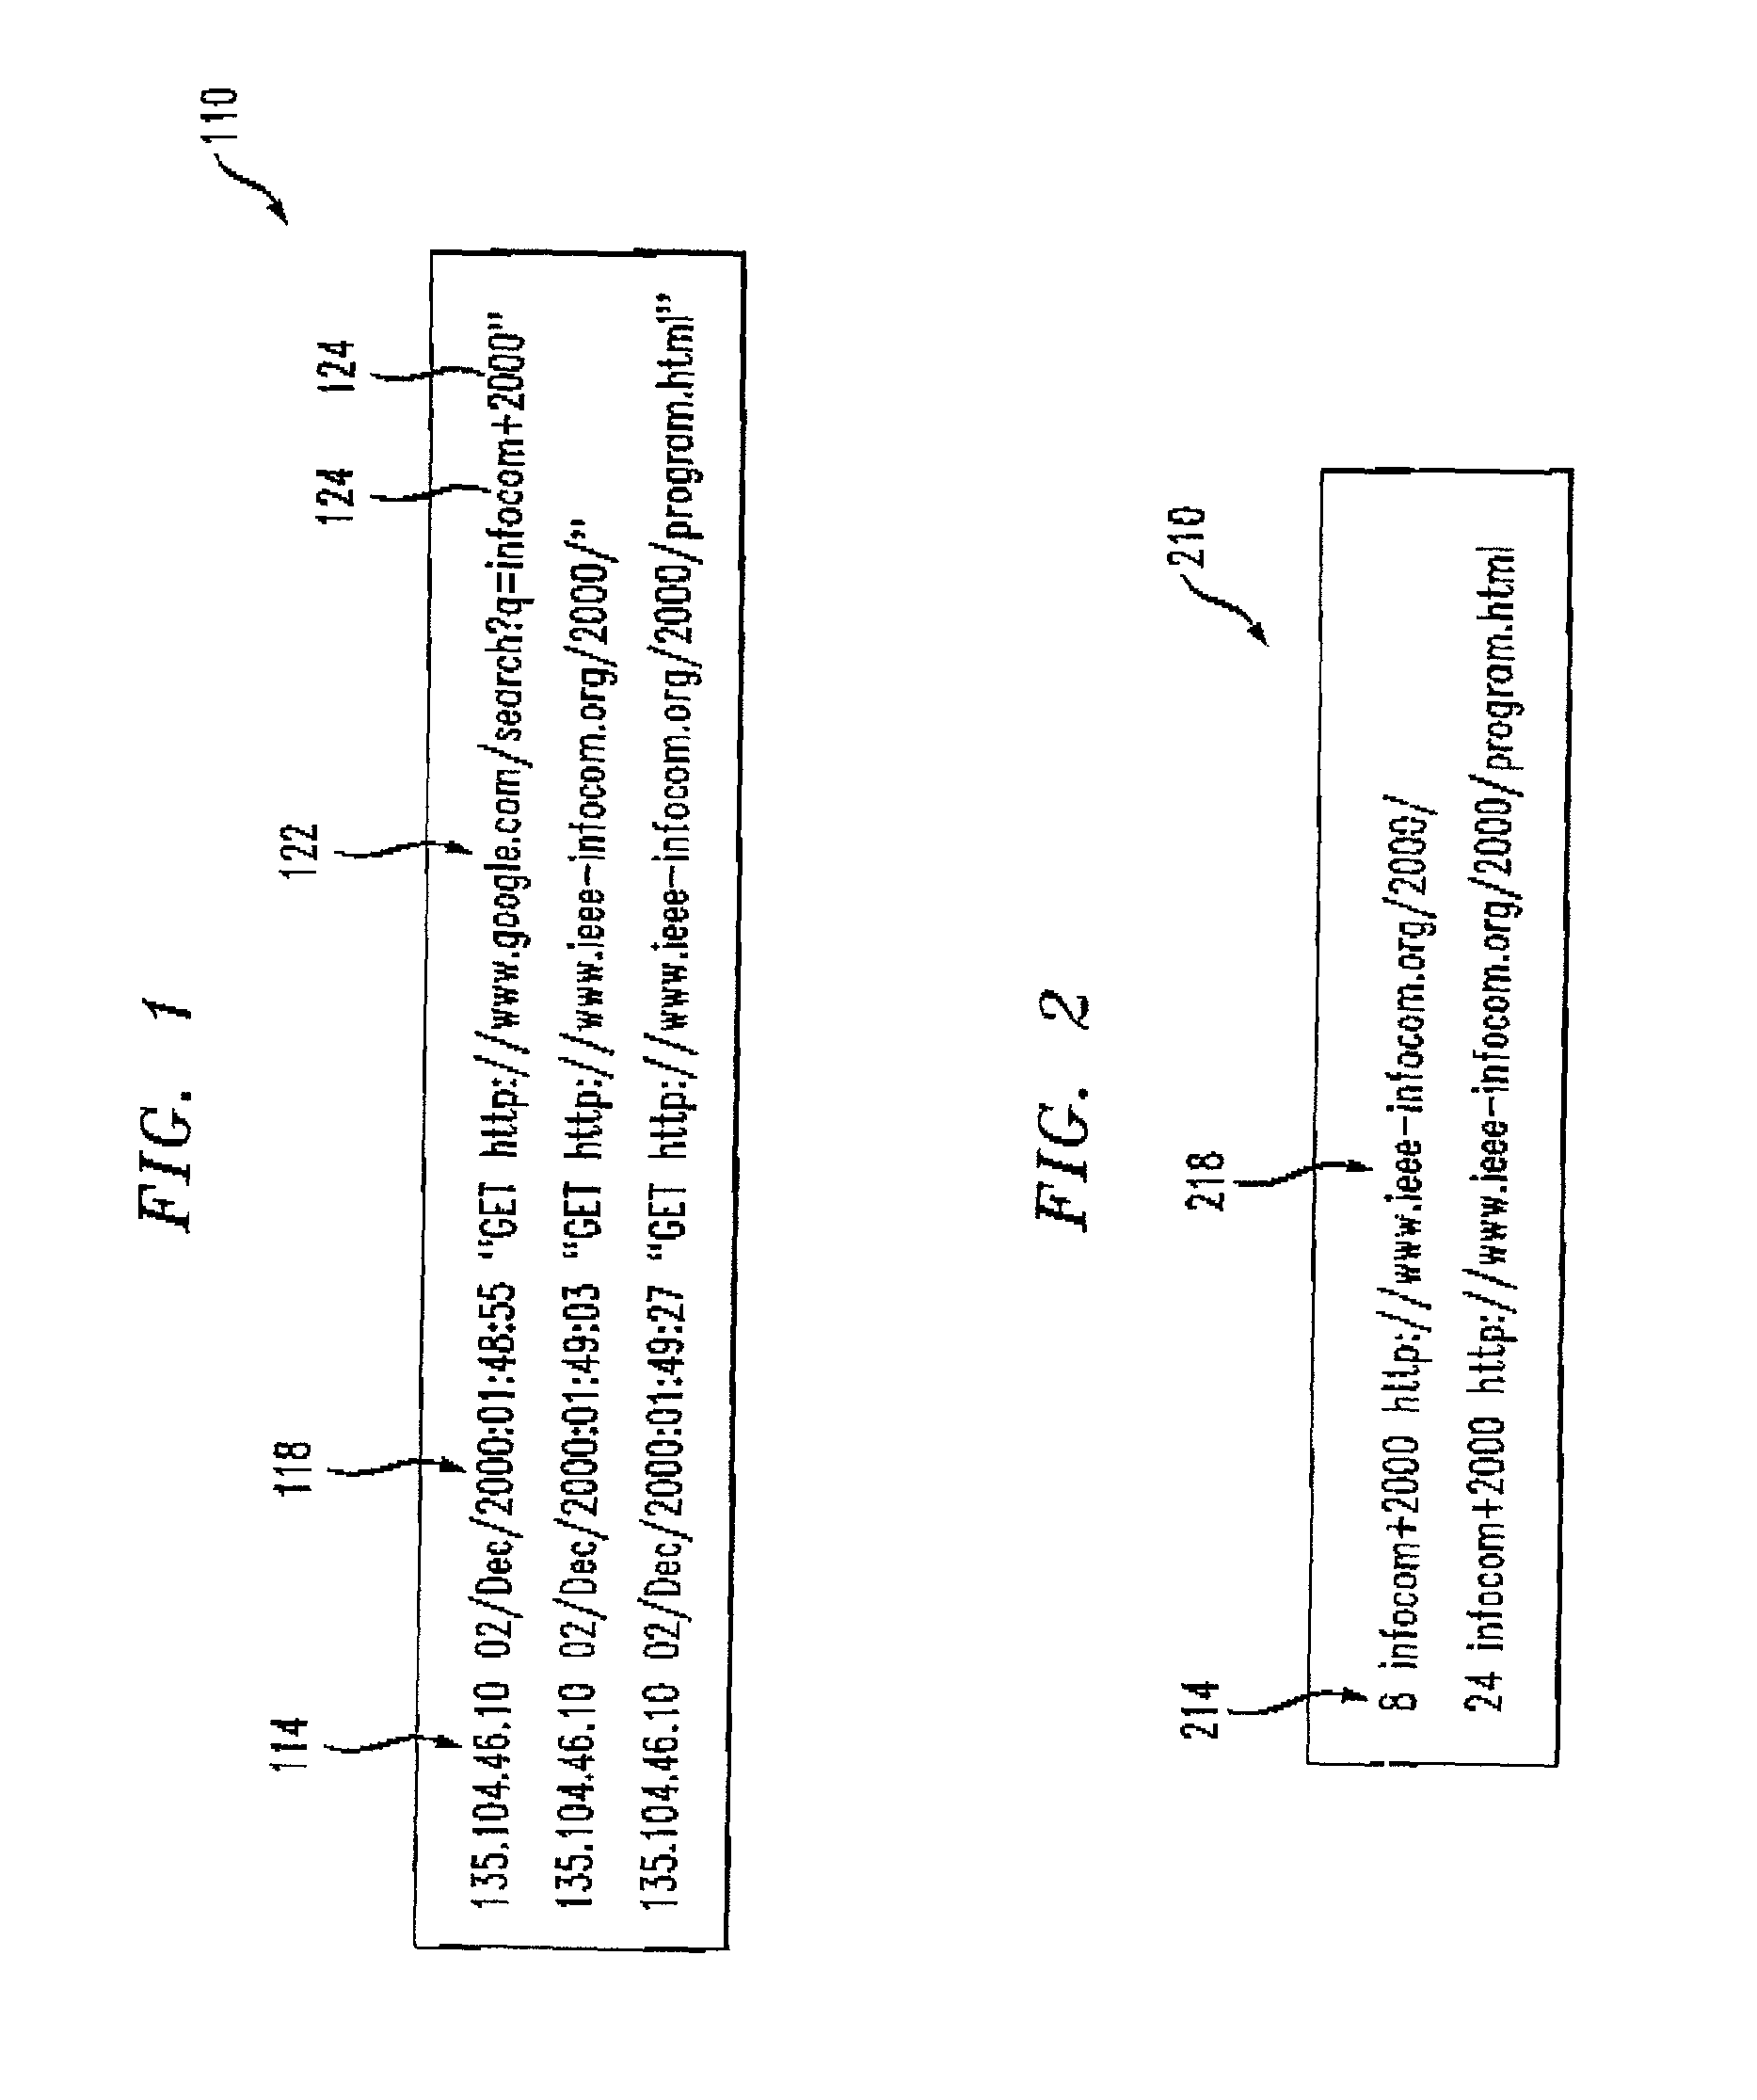 Method for organizing records of database search activity by topical relevance